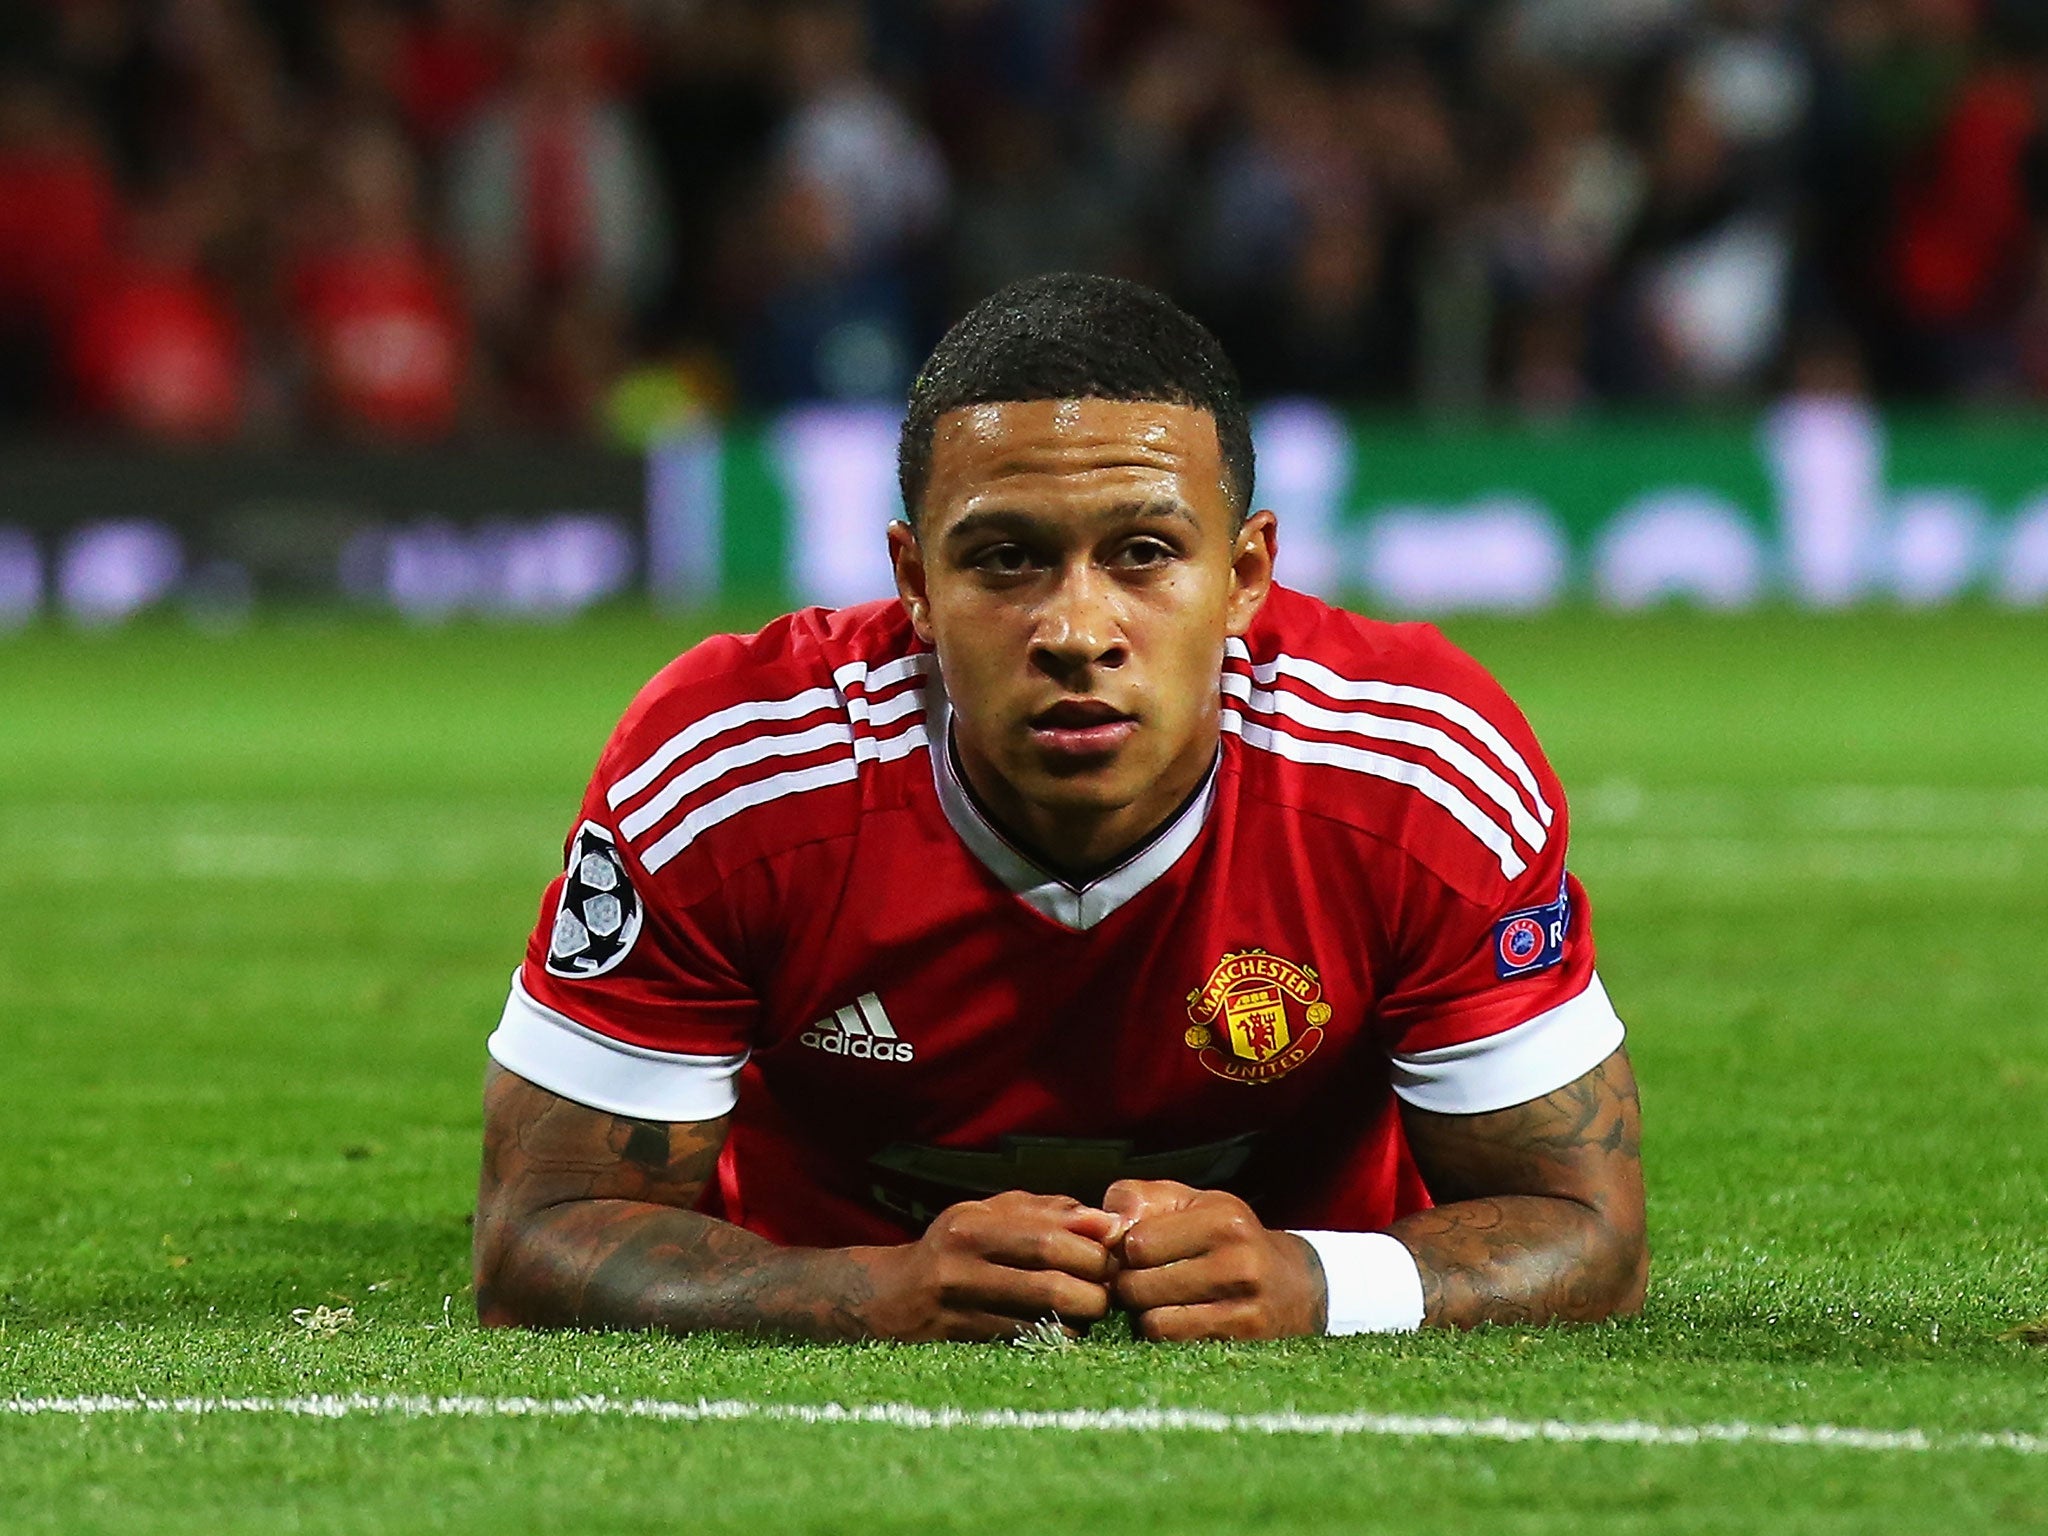 LiveScore - Atletico Madrid are confident of signing Memphis Depay